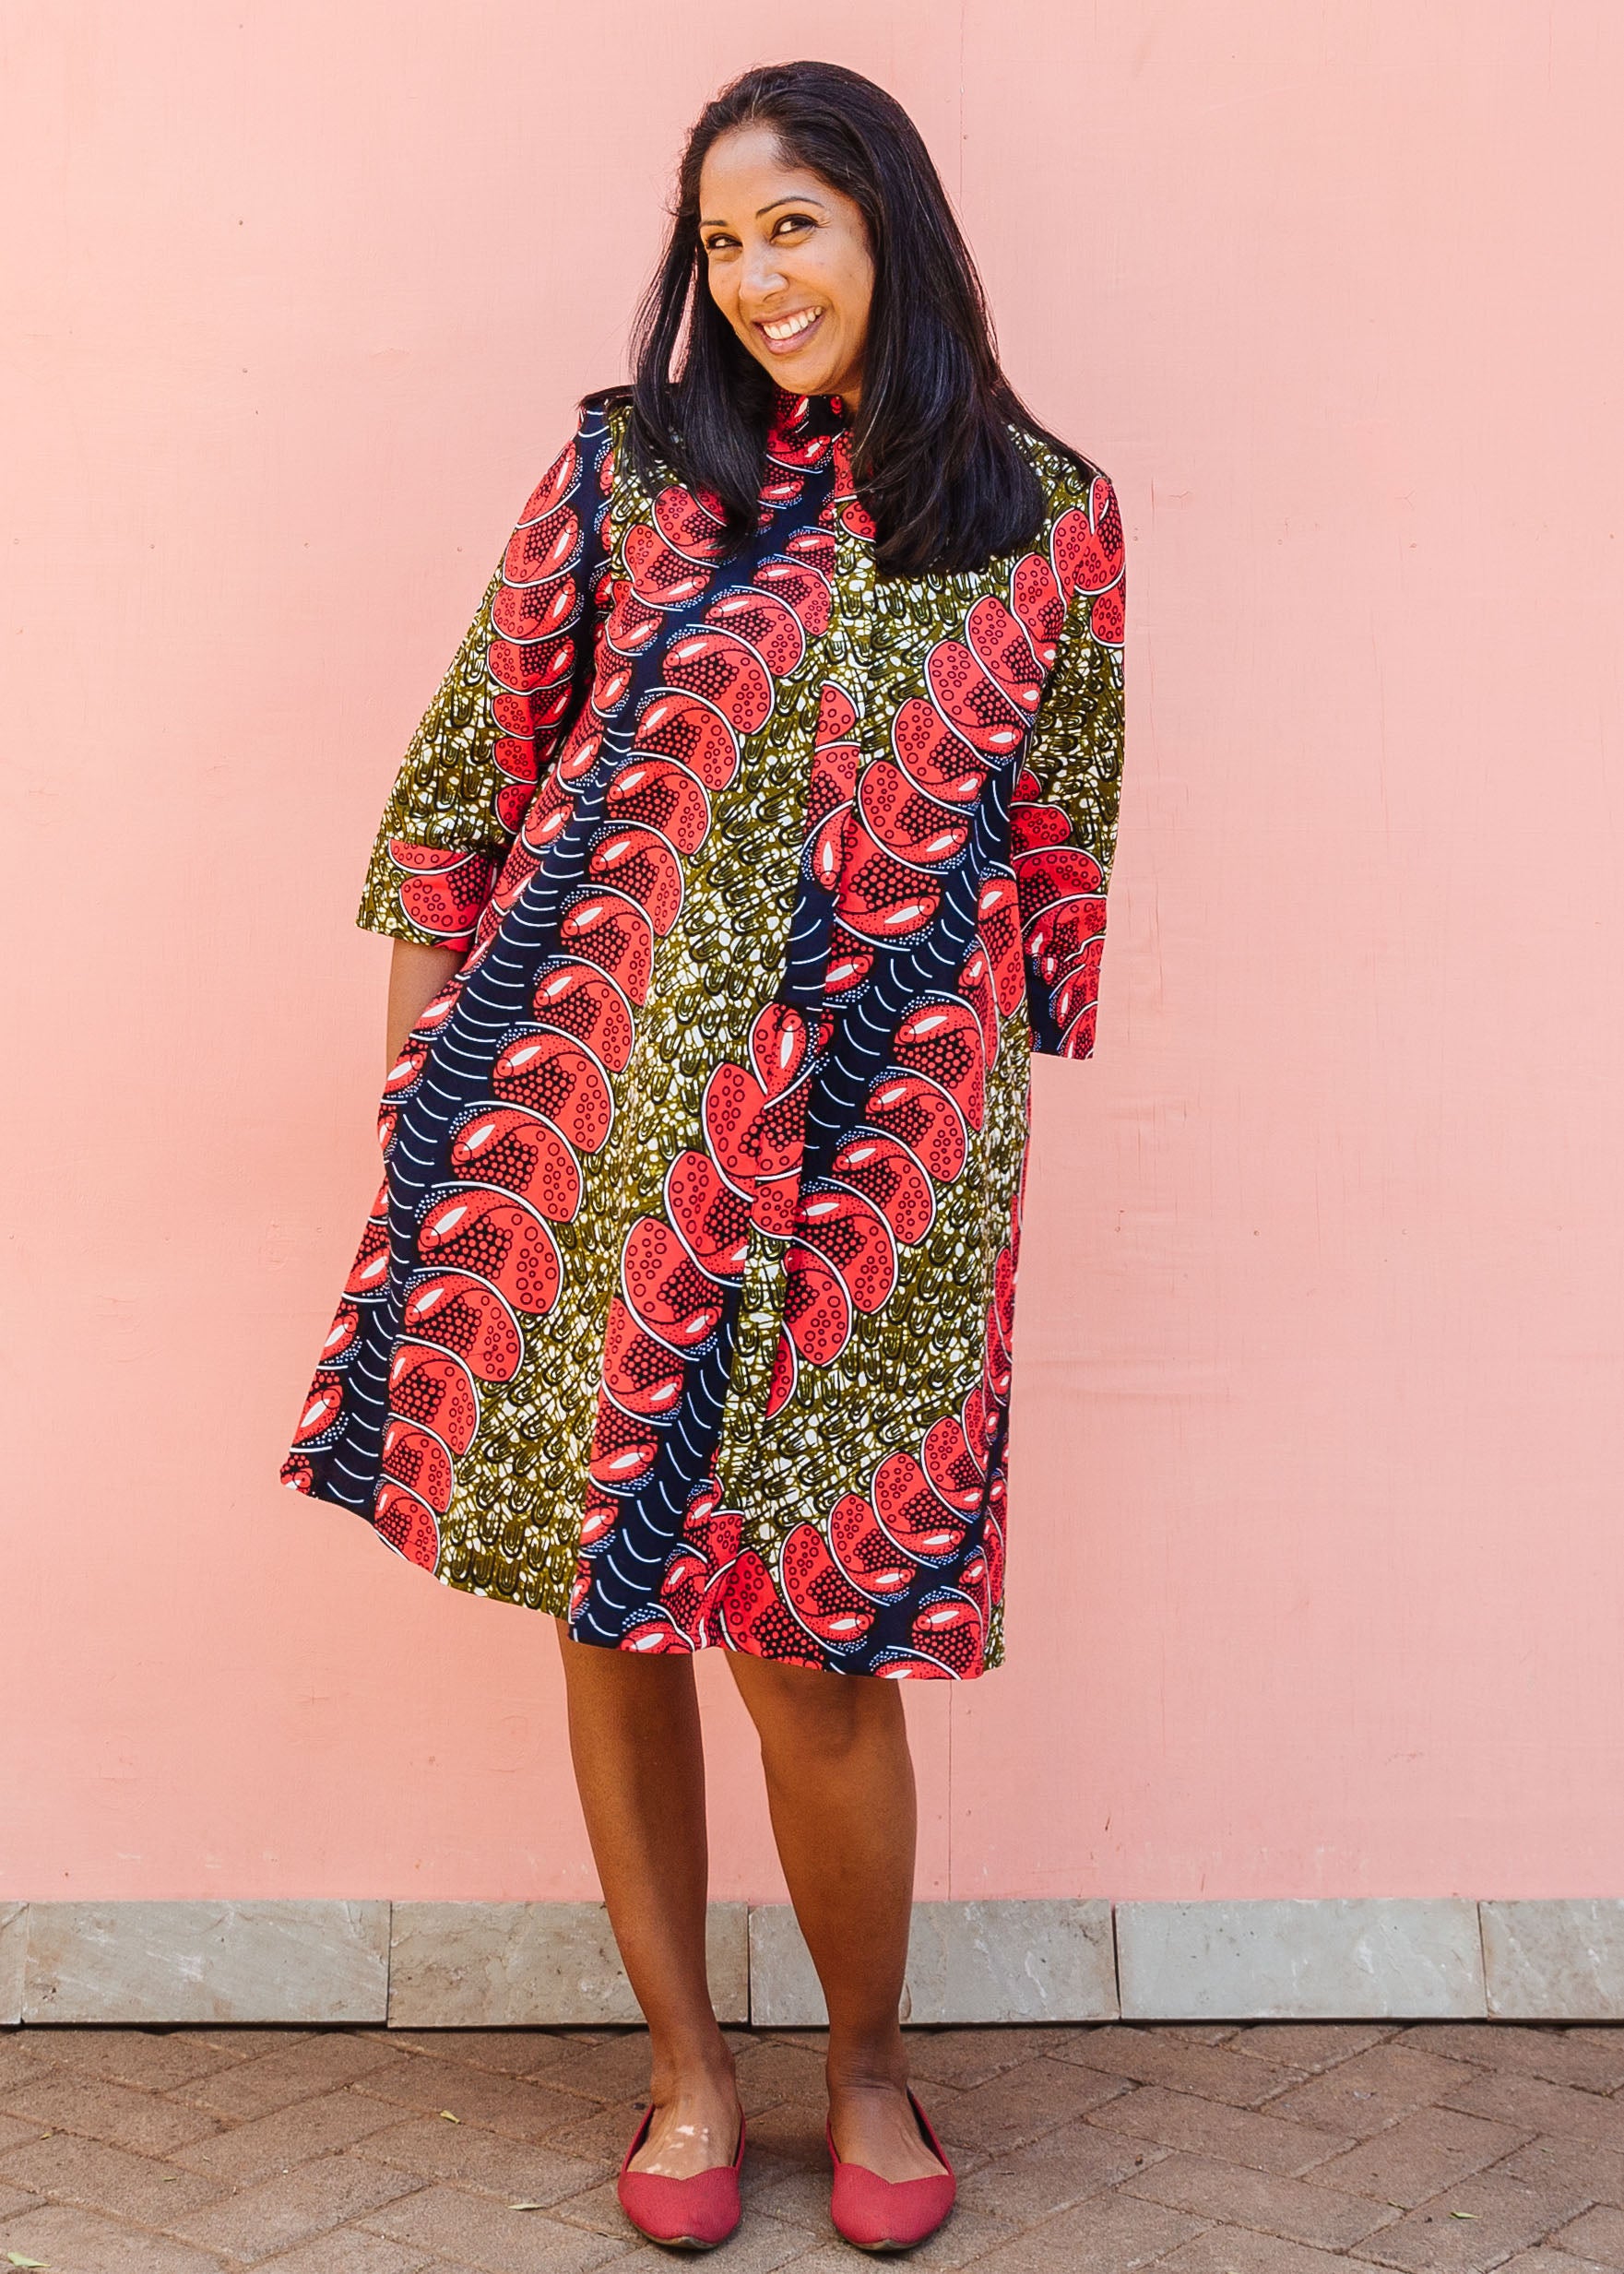 Model wearing green dress, with bold red and navy bauble print.